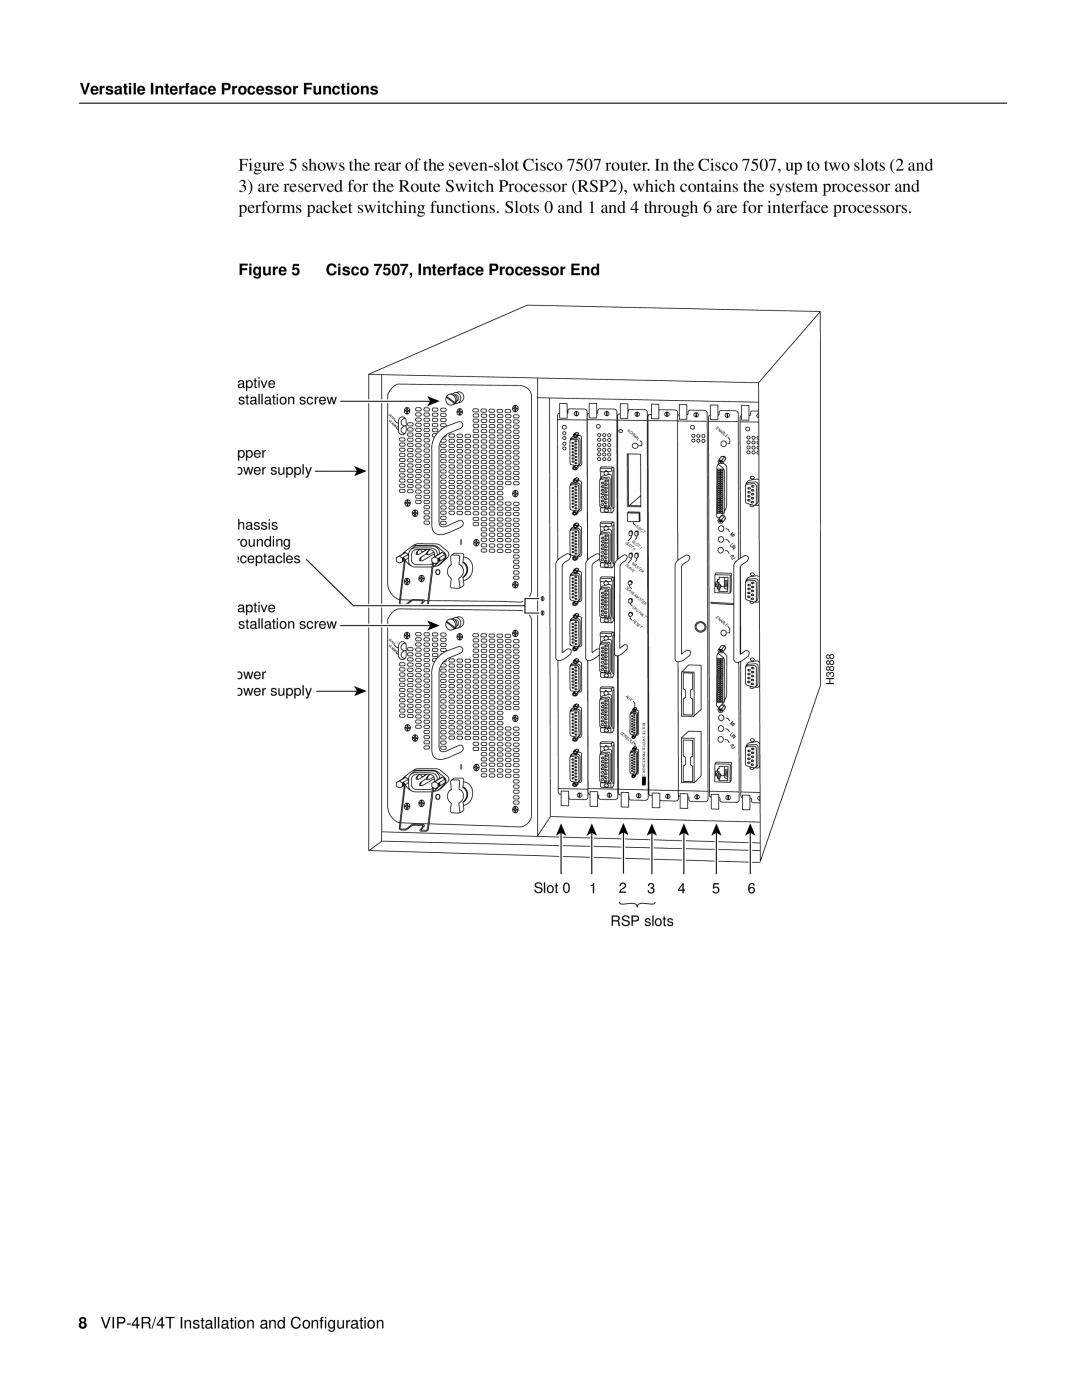 Cisco Systems manual VIP-4R/4T Installation and Conﬁguration, H3888 